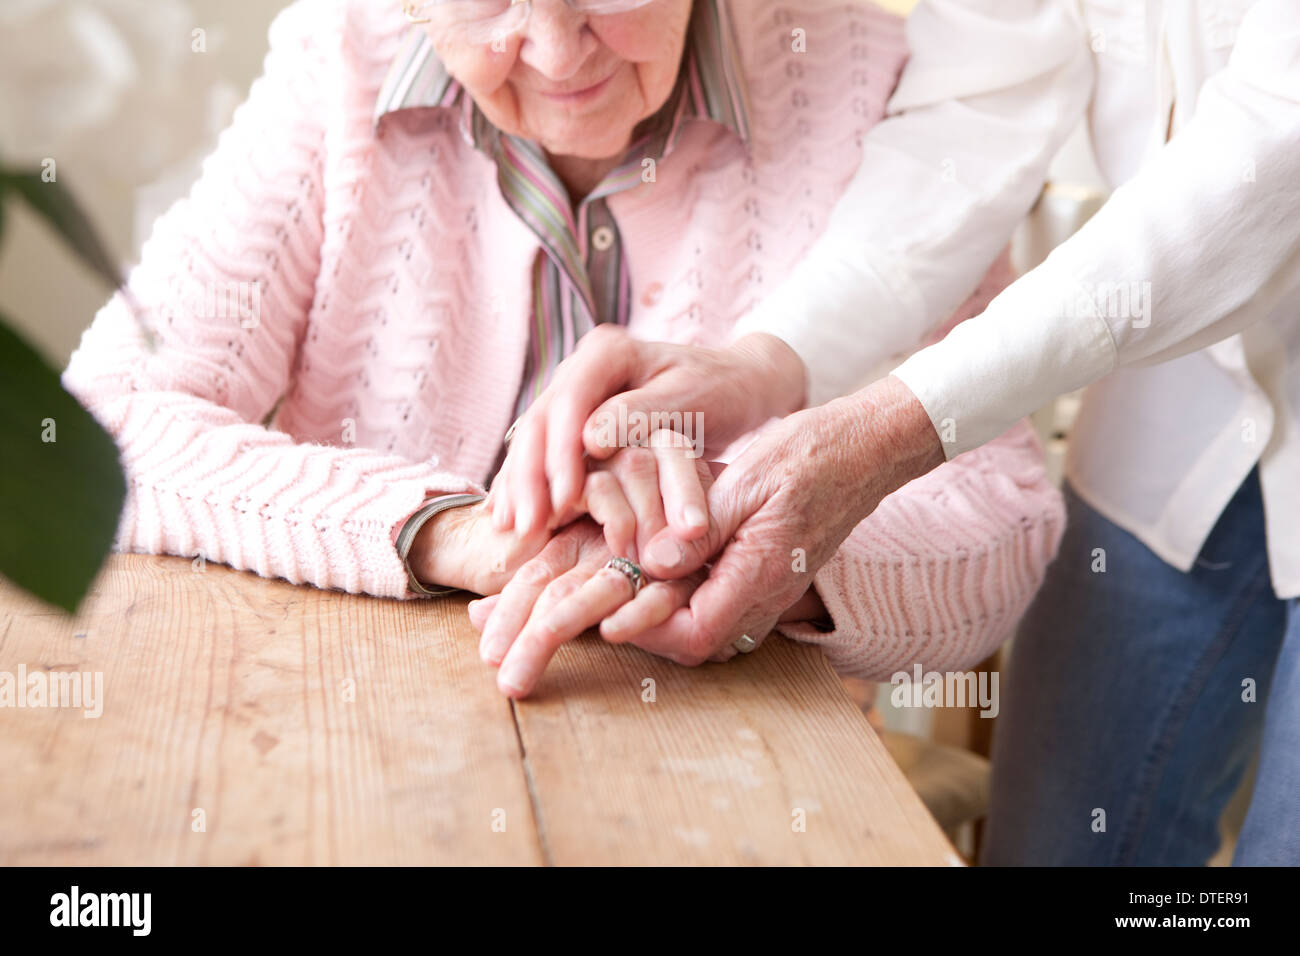 Close-up of hands of mature woman holding hands of elderly woman Stock Photo